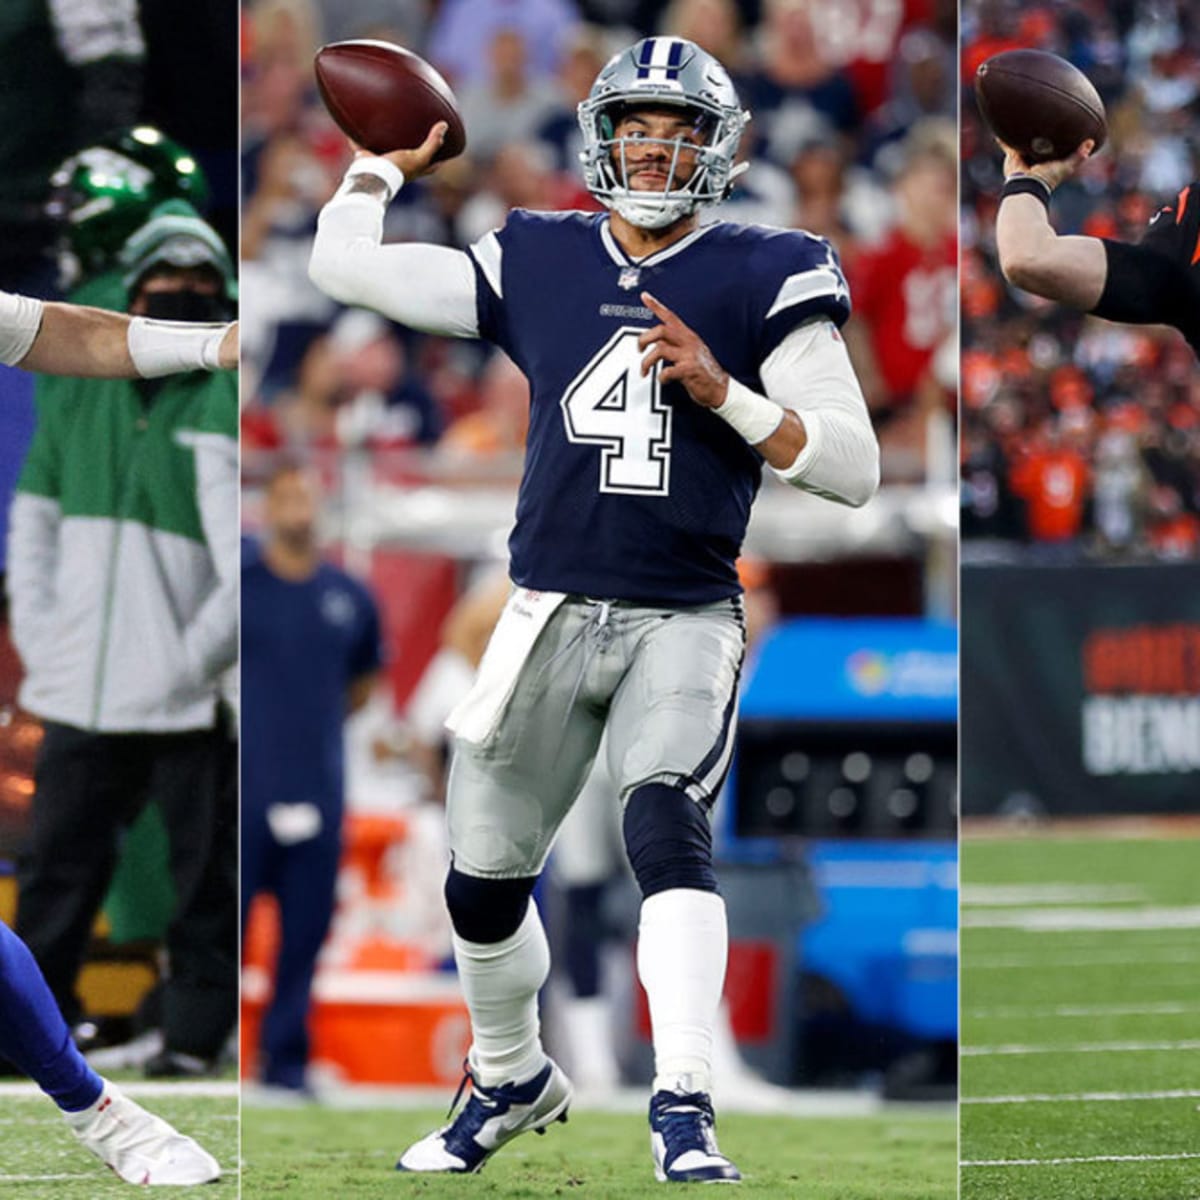 ESPN on X: The top 10 NFL QBs as voted by execs, coaches and